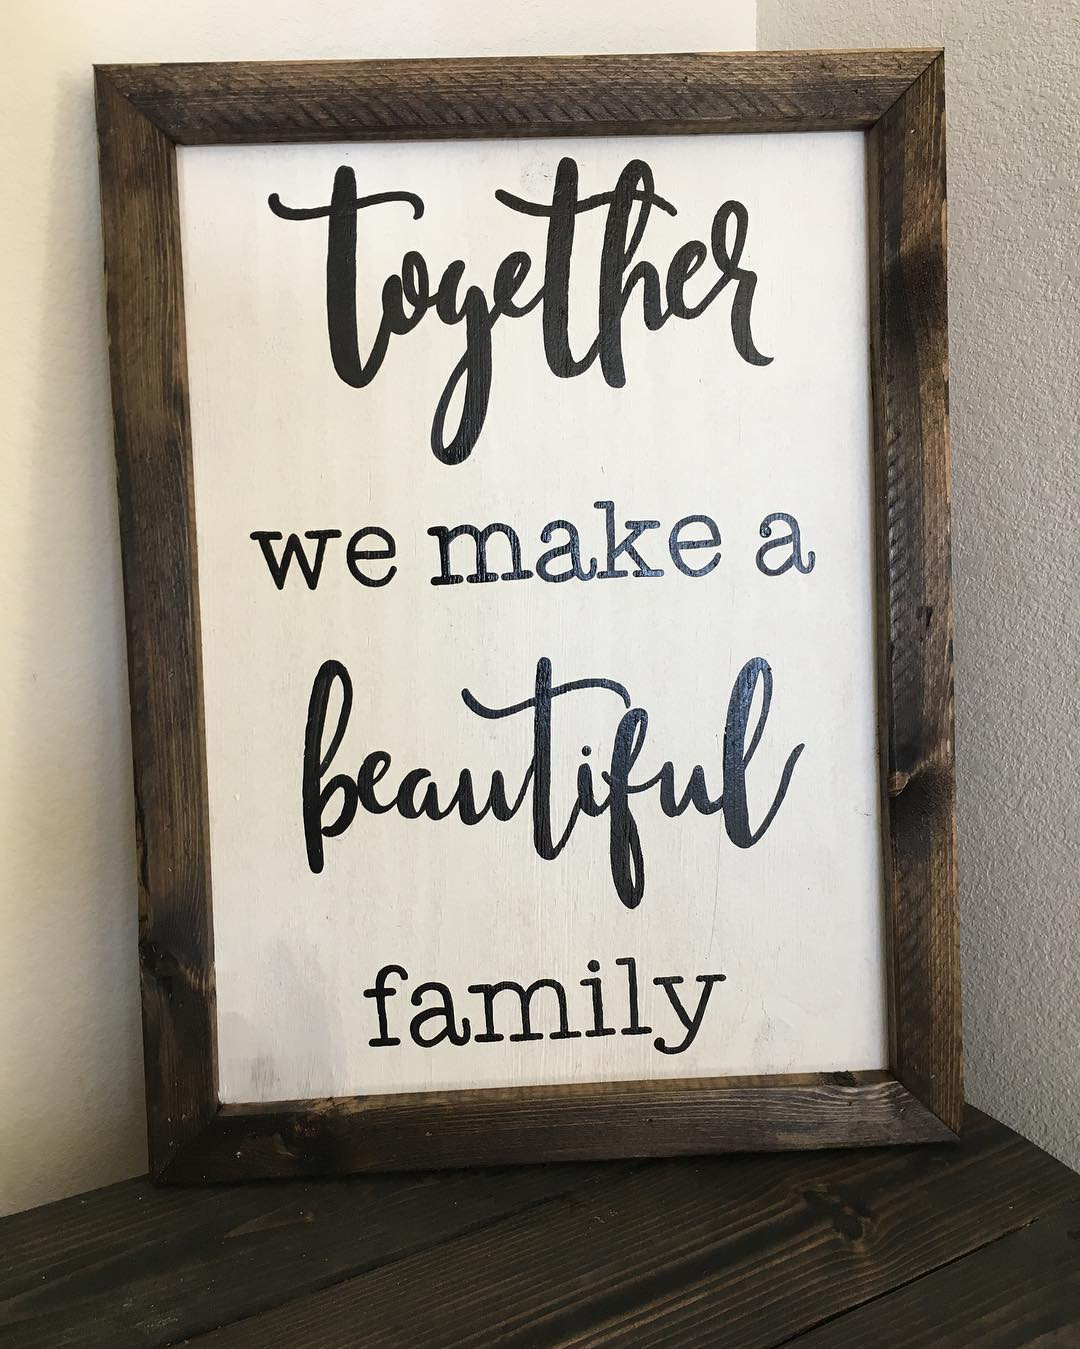 Inspiration Quotes About Family
 60 Best And Inspirational Family Quotes